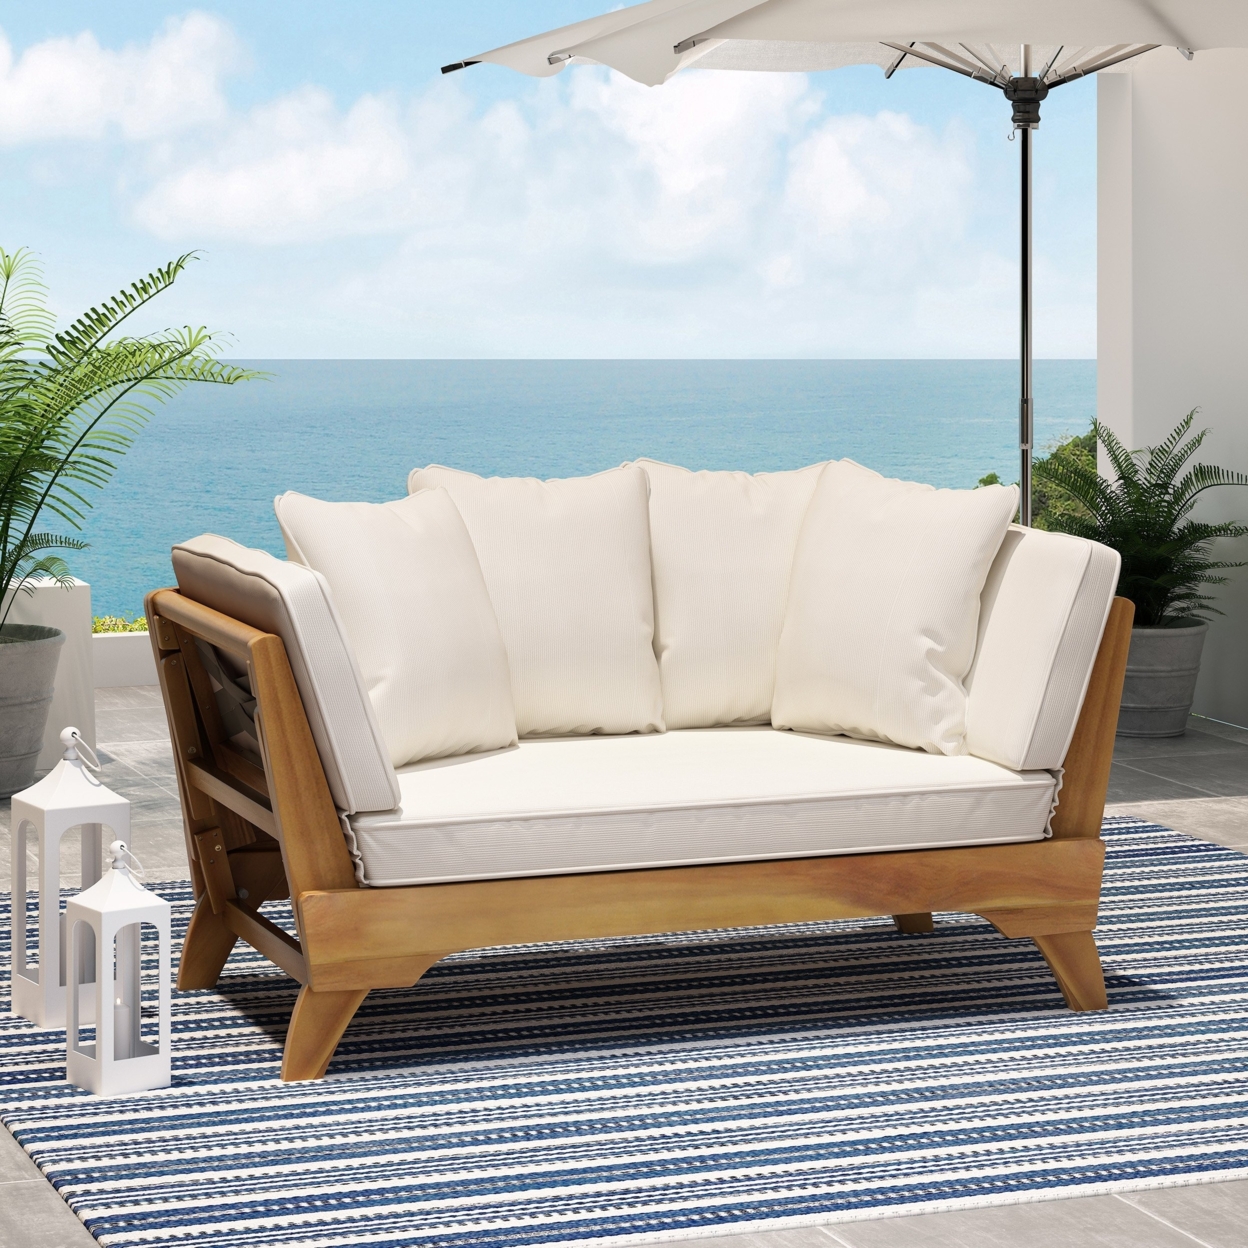 Oceanna Outdoor Acacia Wood Expandable Daybed With Water Resistant Cushions - Gray/dark Gray/gray